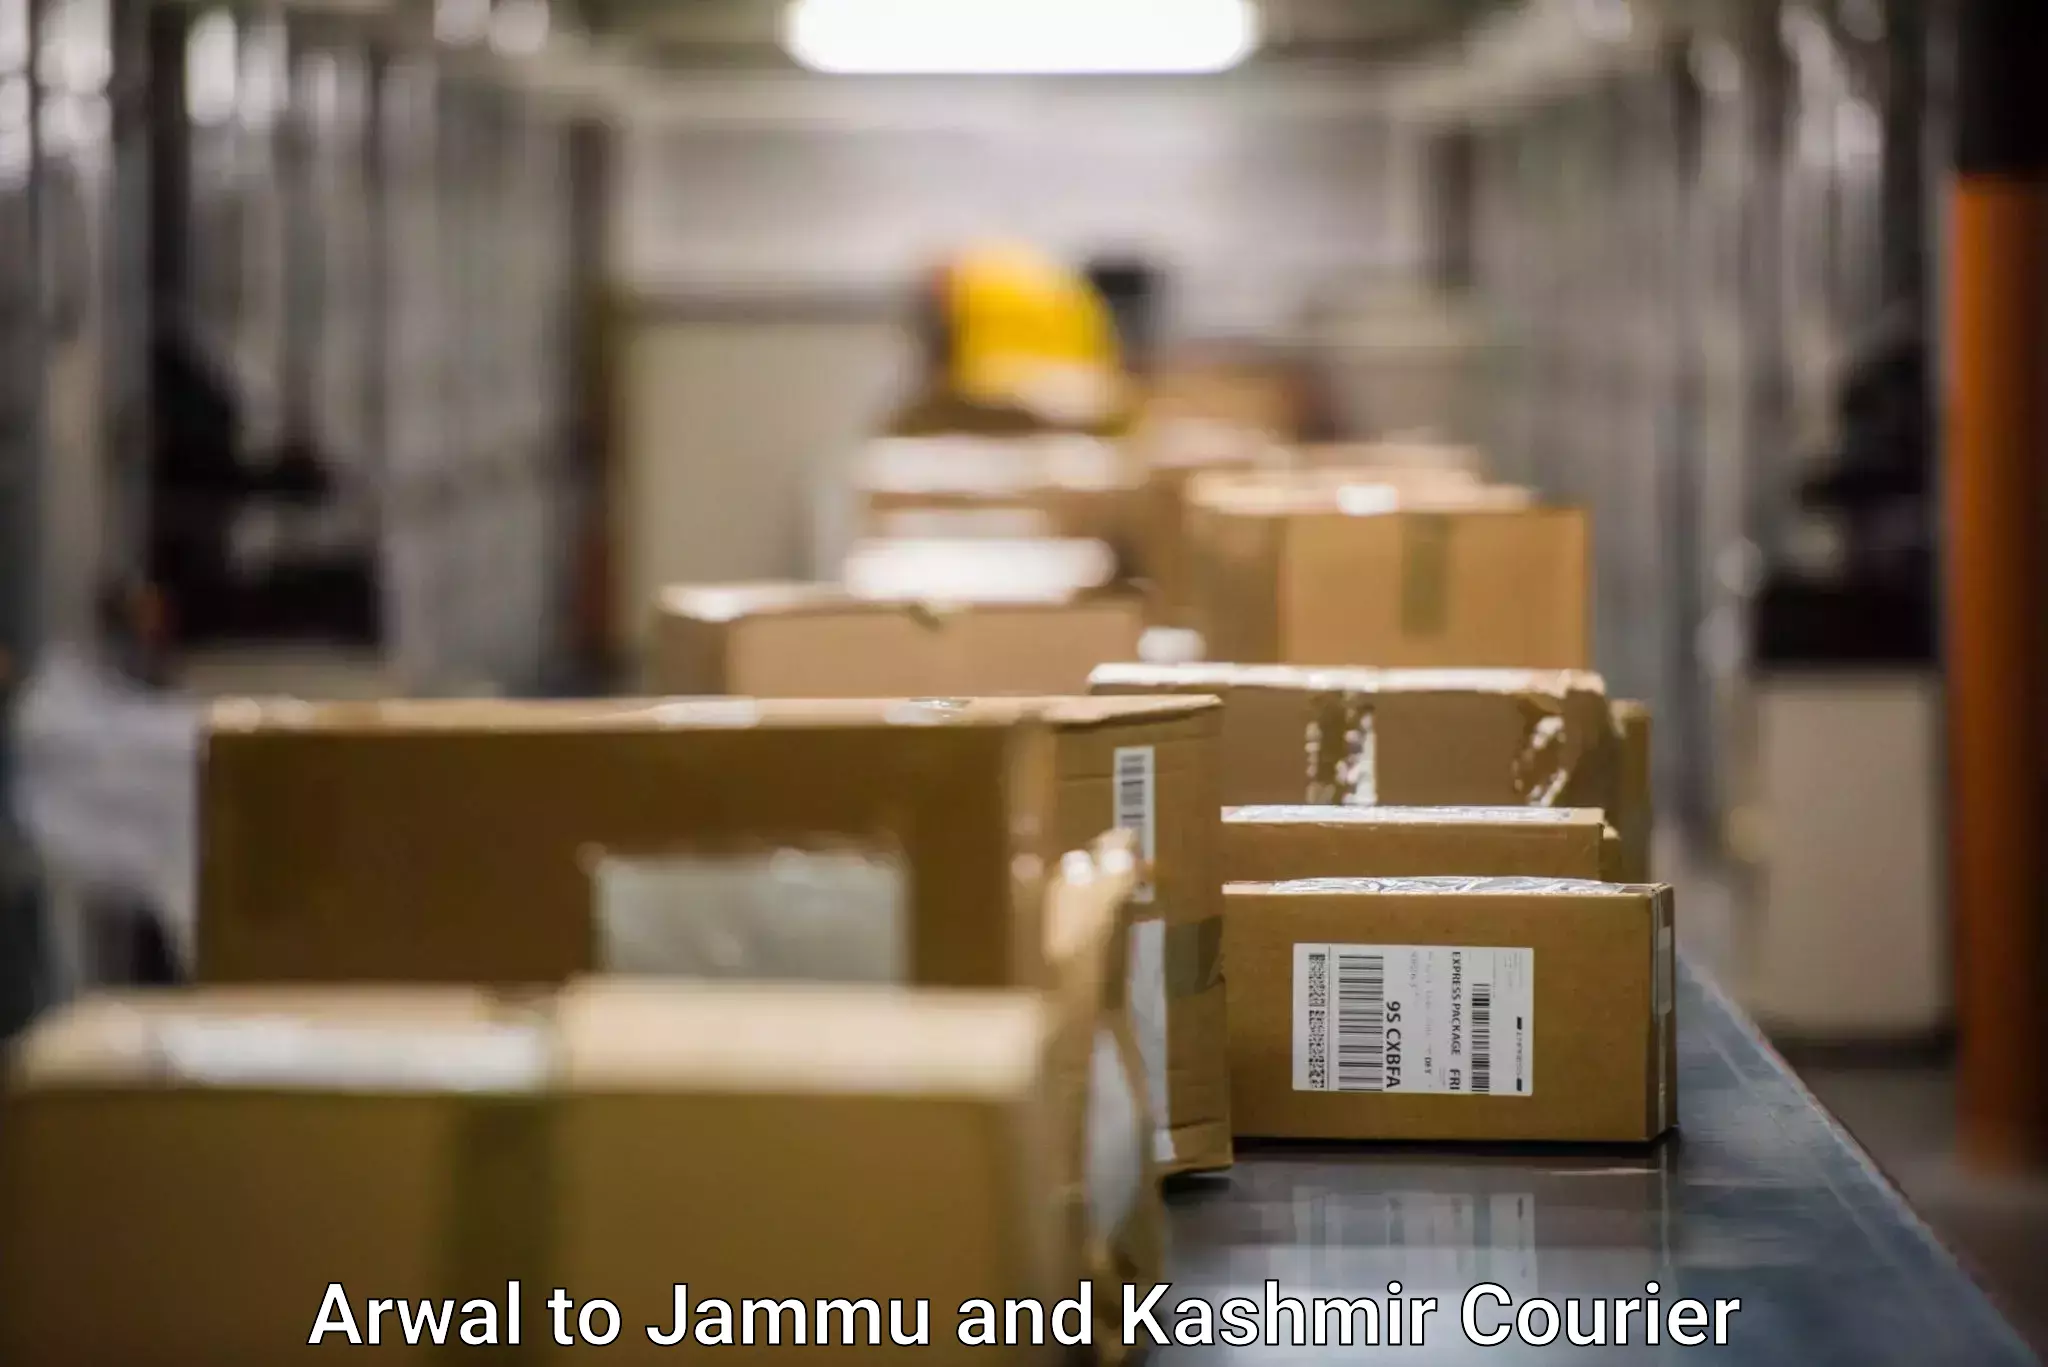 Cash on delivery service Arwal to Jammu and Kashmir